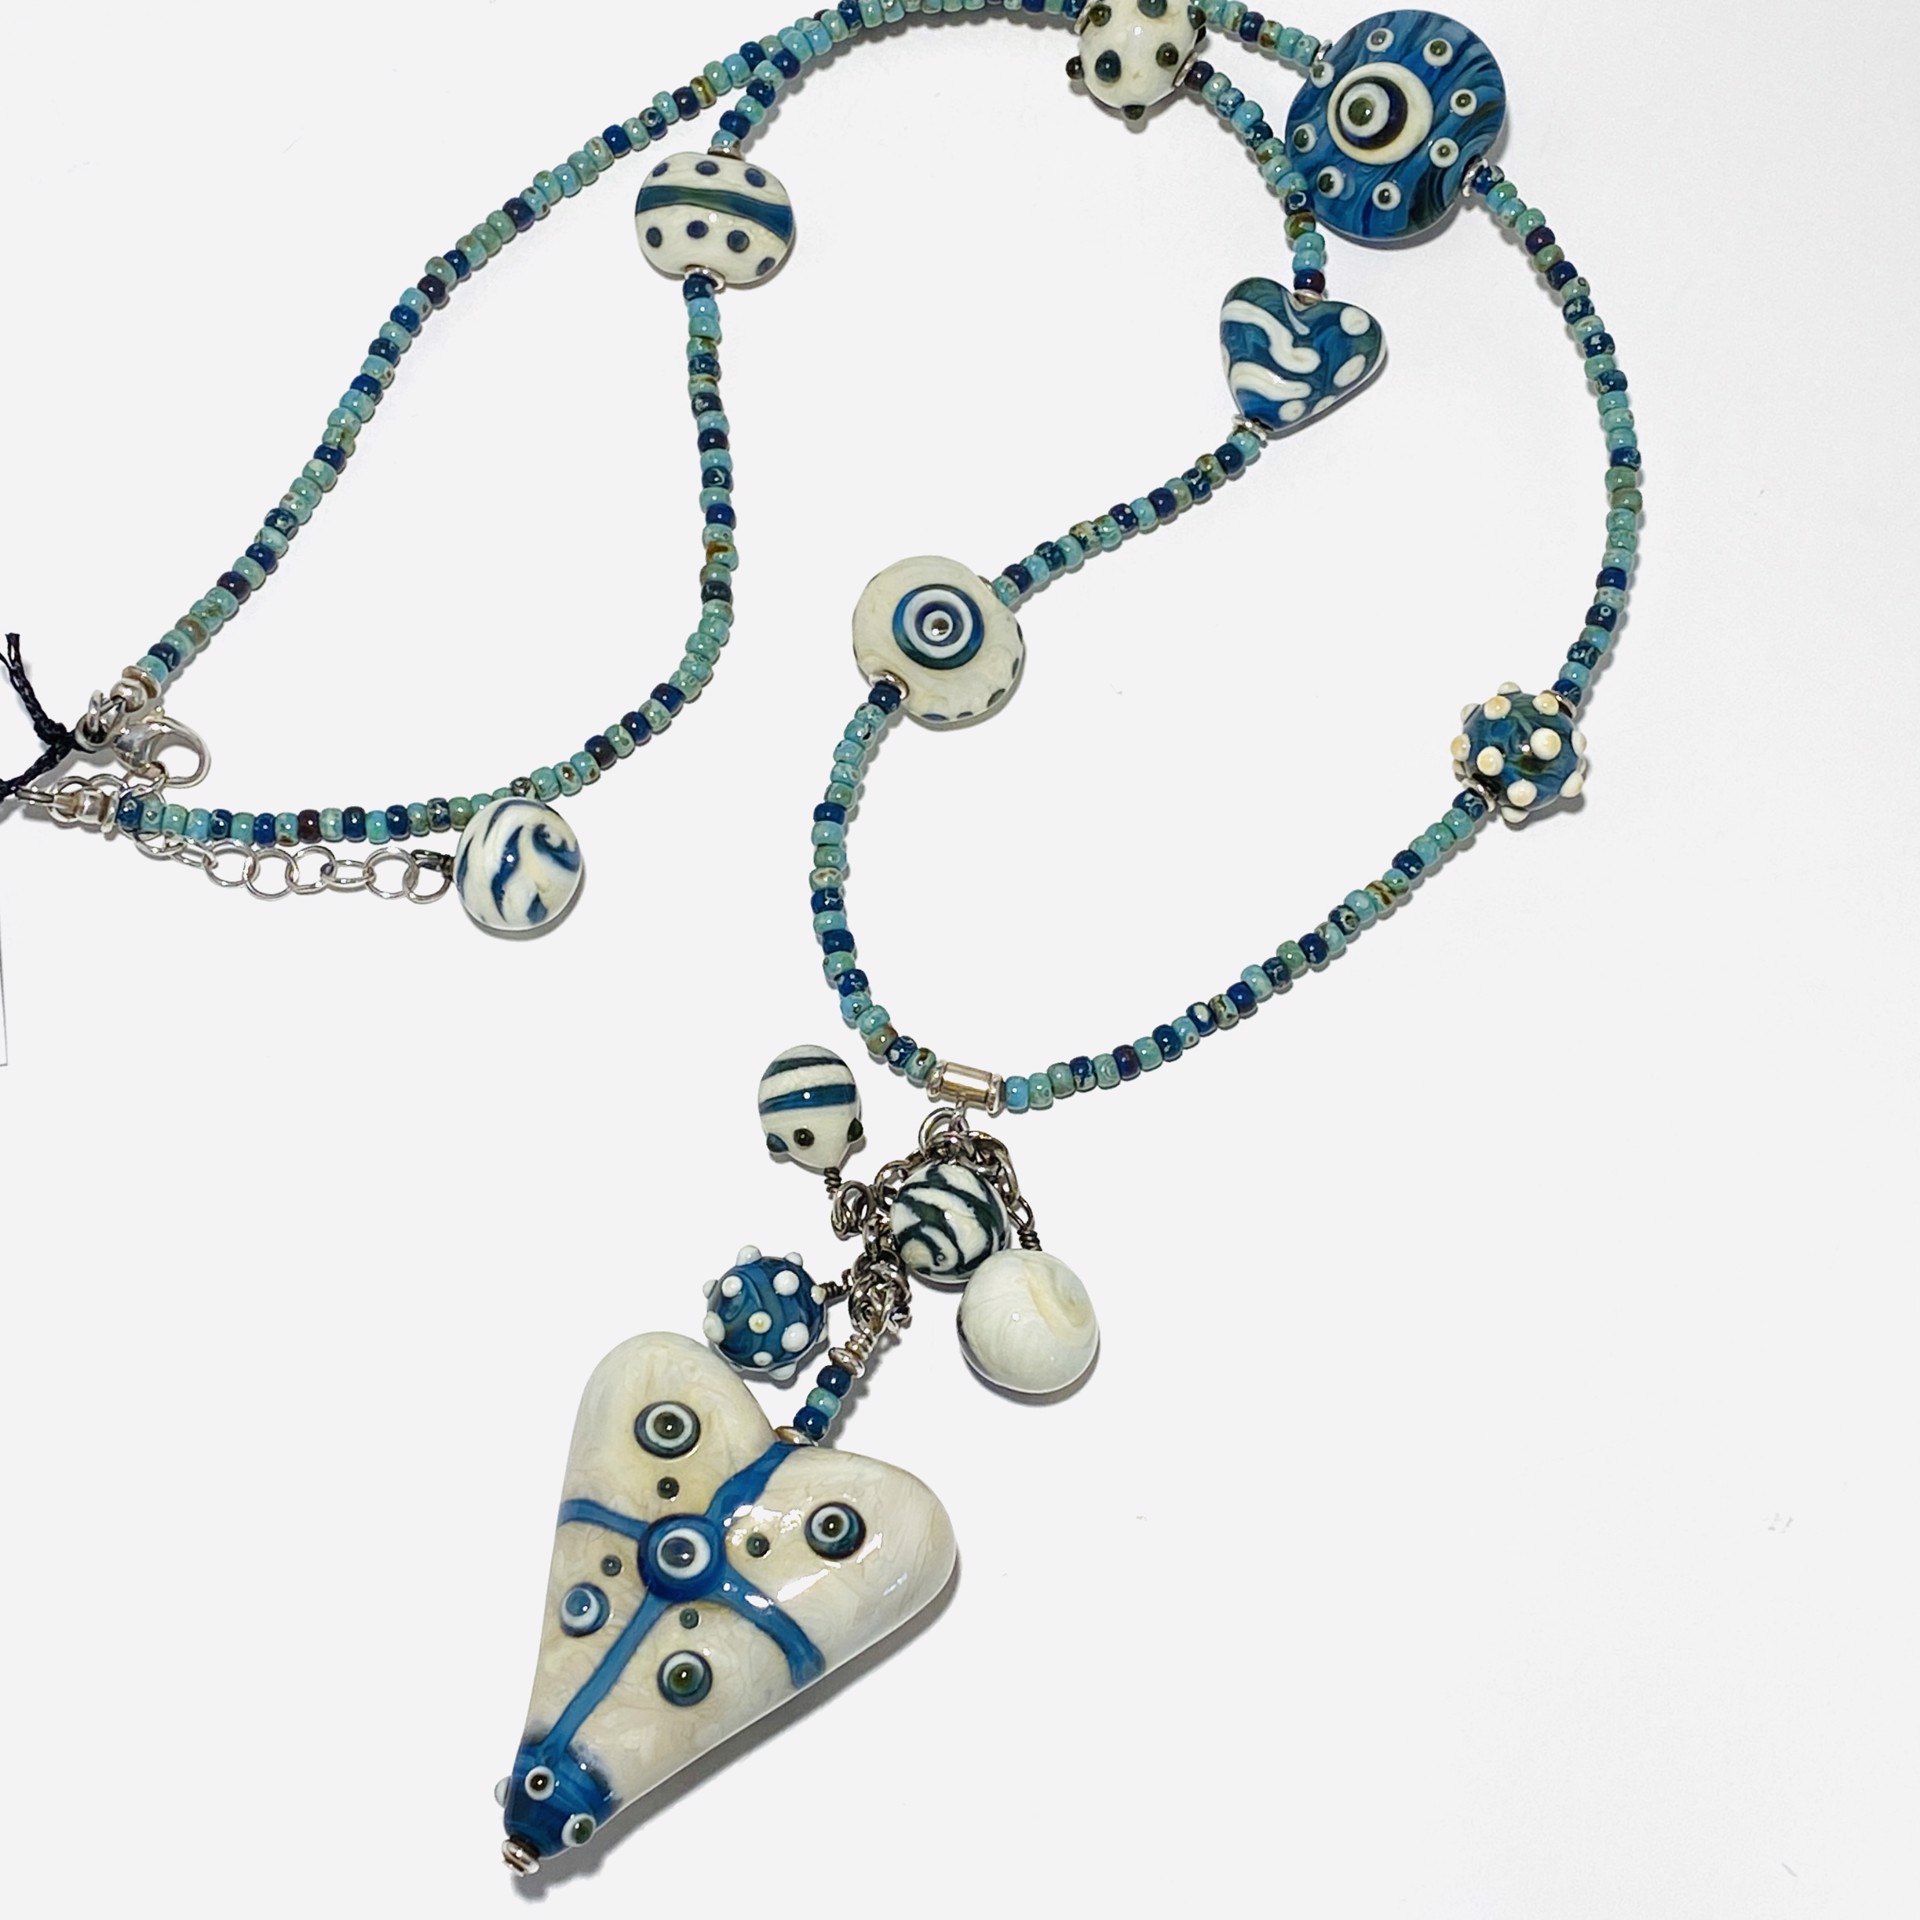 LS23-1A White and Blue Averio Kronos Heart Multi Bead Cluster Beaded Necklace by Linda Sacra